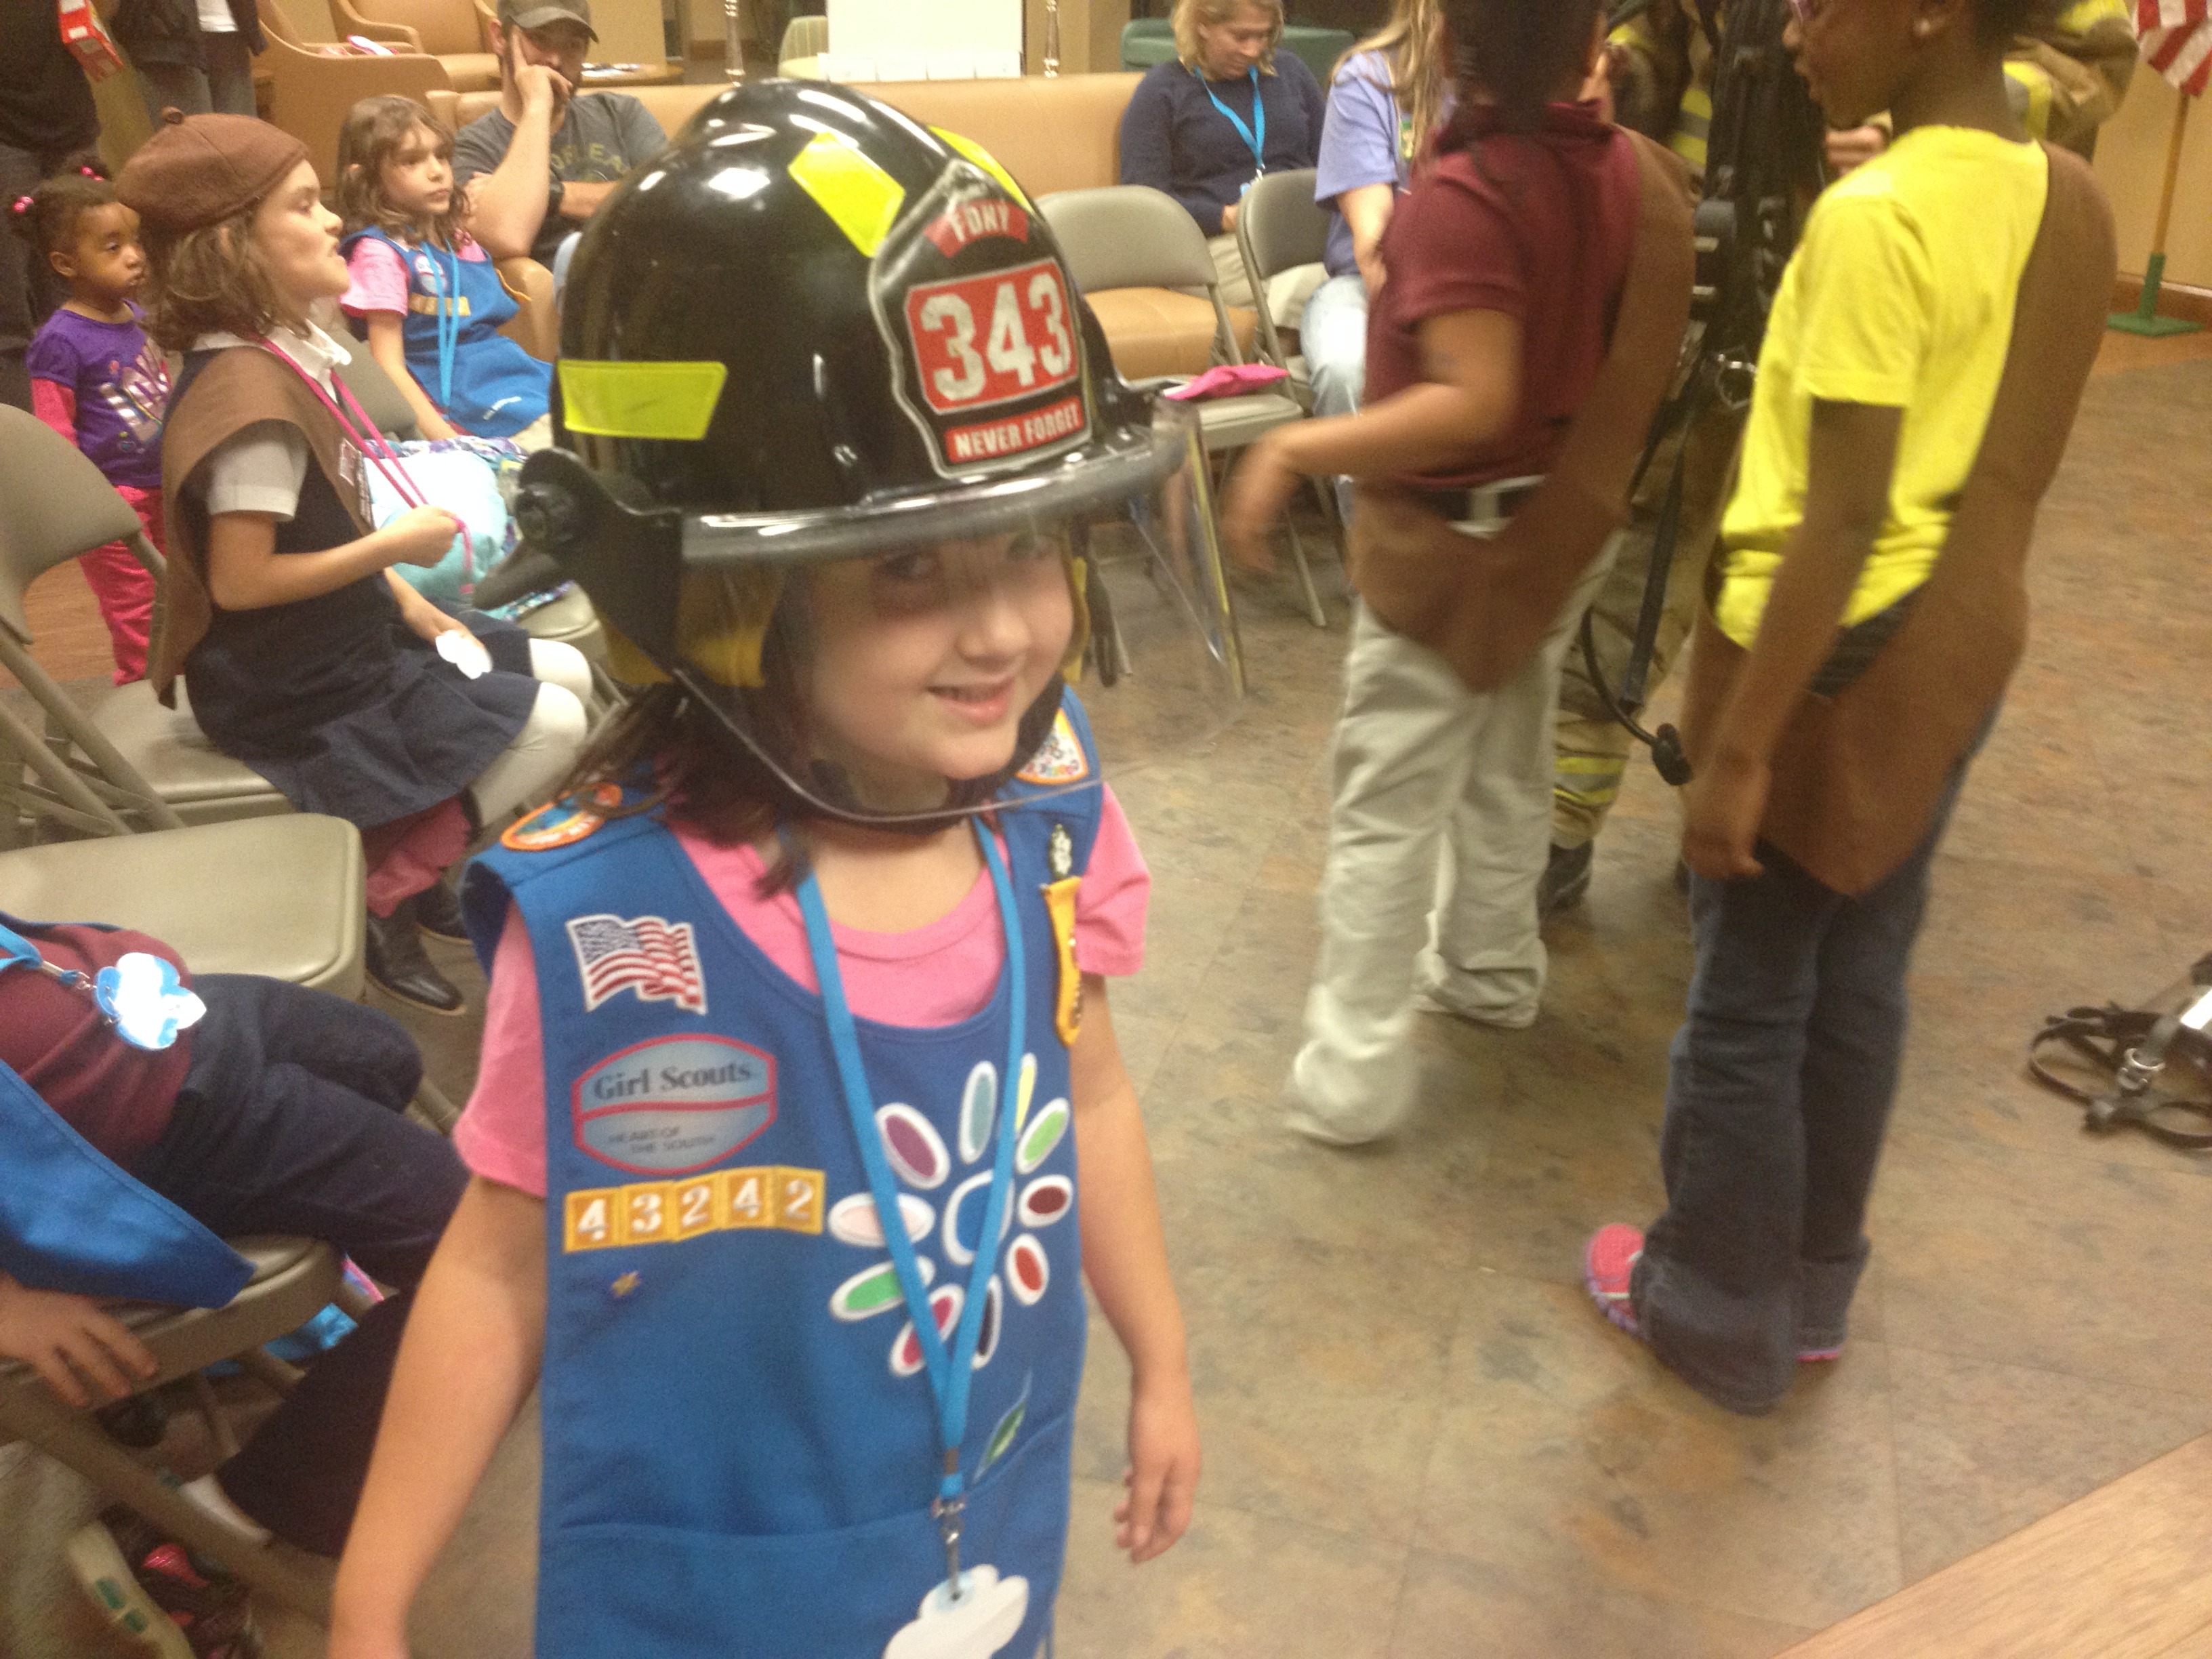 November – Fire Safety for GS Troop 43242